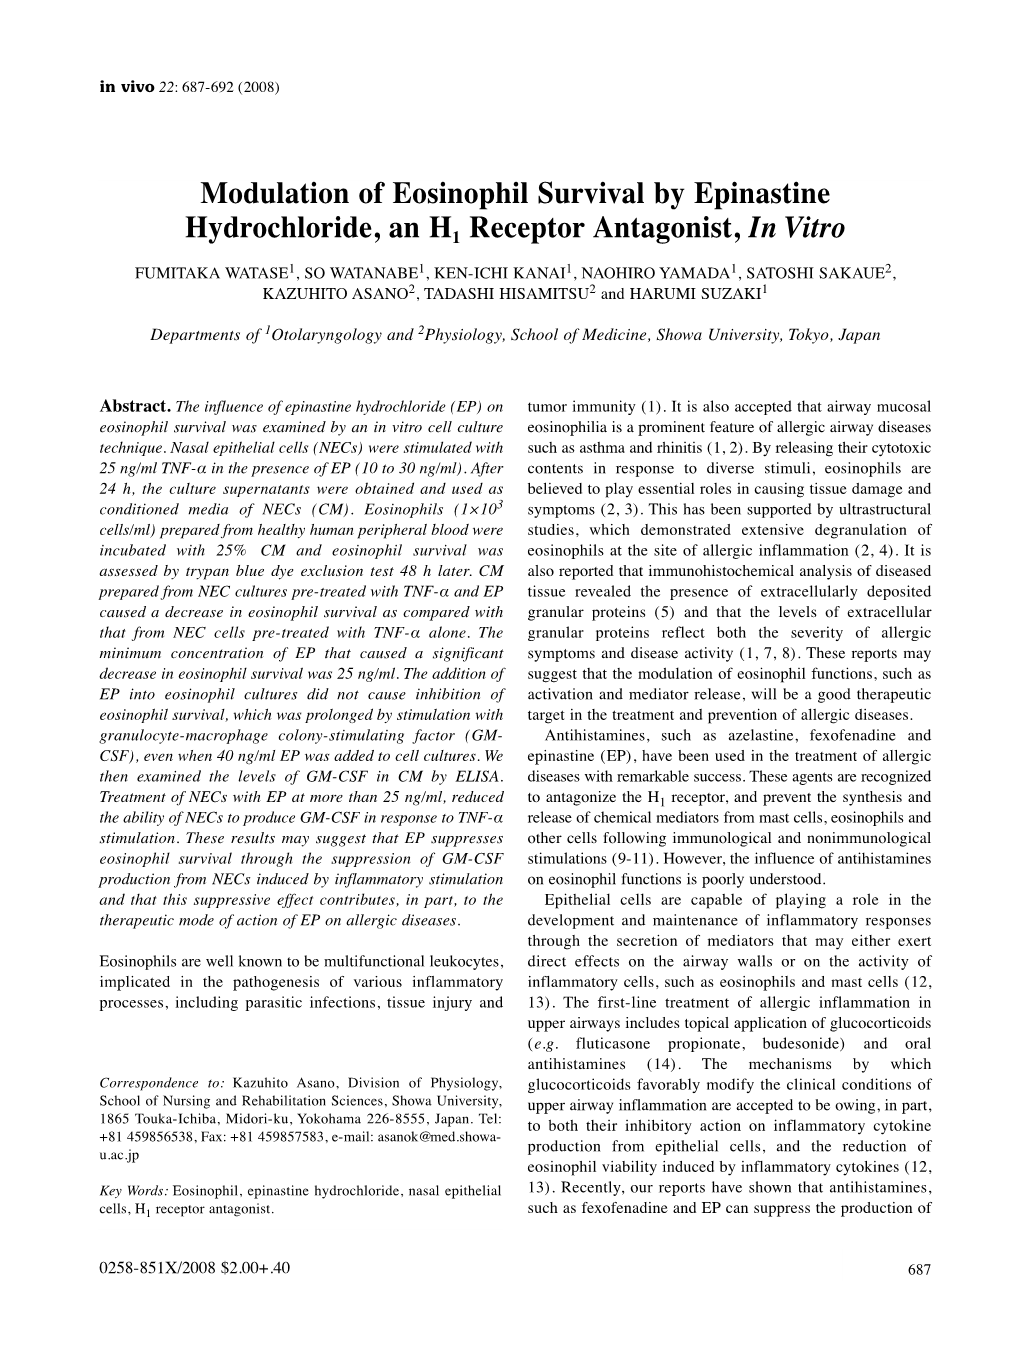 Modulation of Eosinophil Survival by Epinastine Hydrochloride, an H1